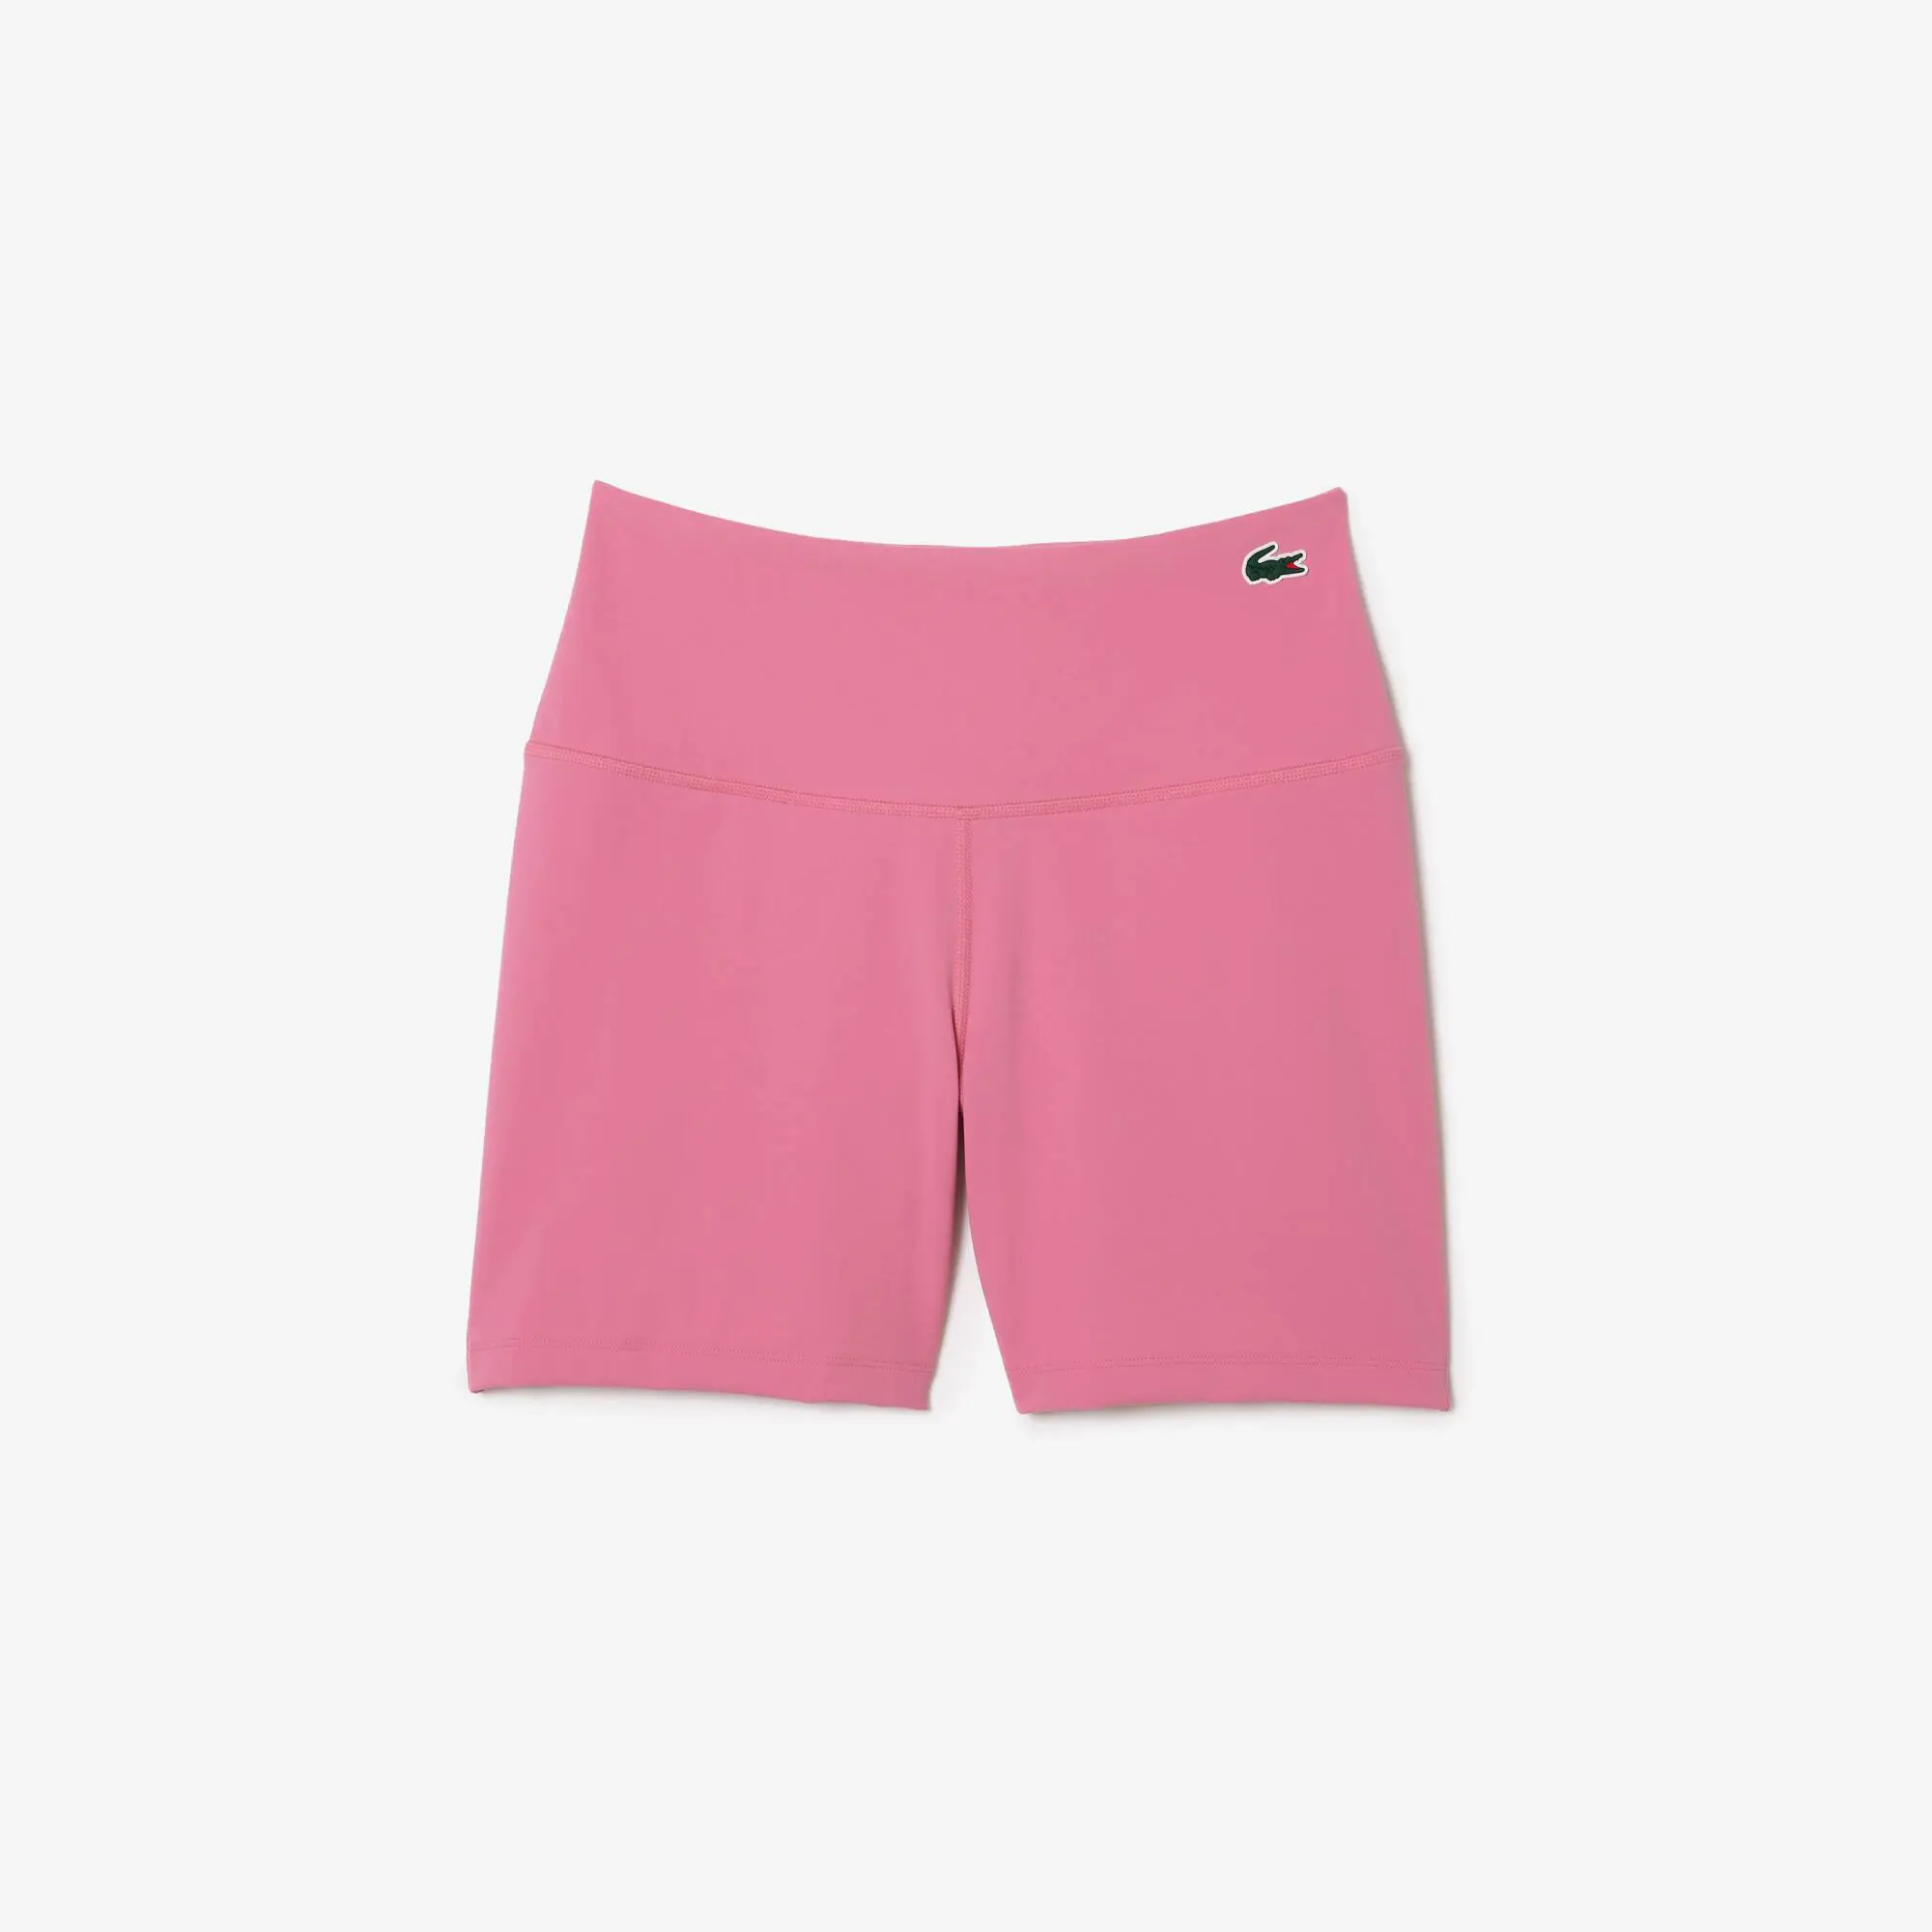 Lacoste Women’s Lacoste Sport Recycled Polyamide Gym Shorts. 1